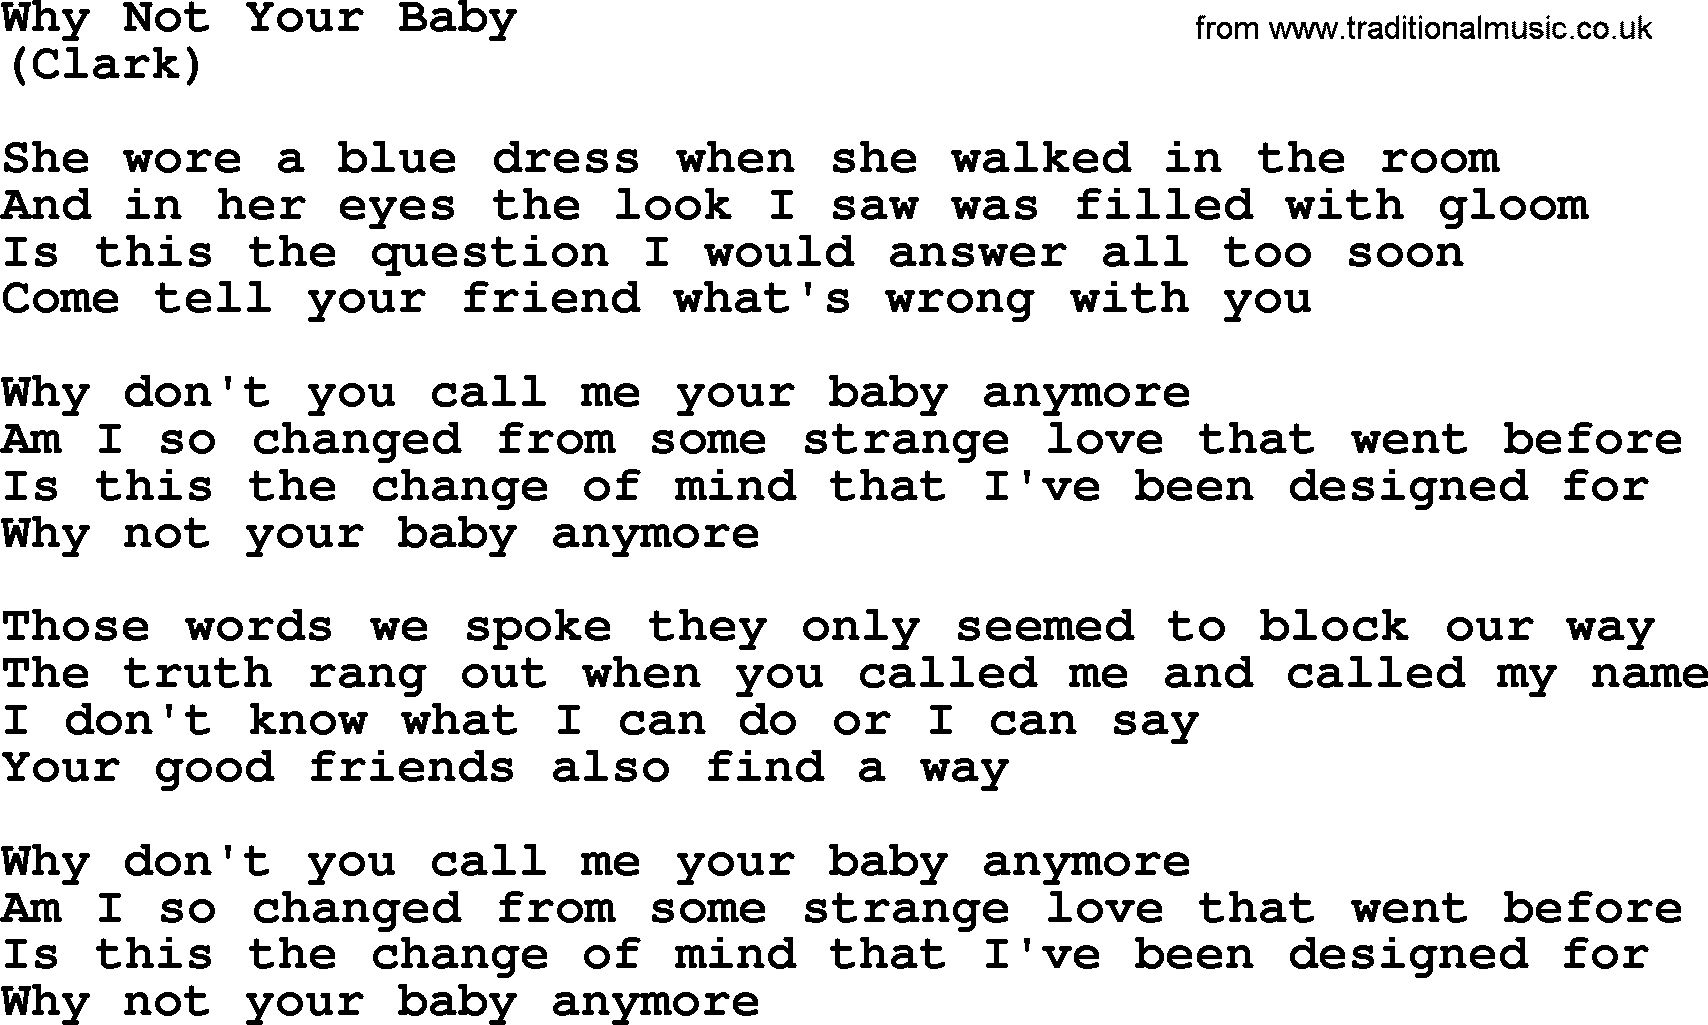 The Byrds song Why Not Your Baby, lyrics